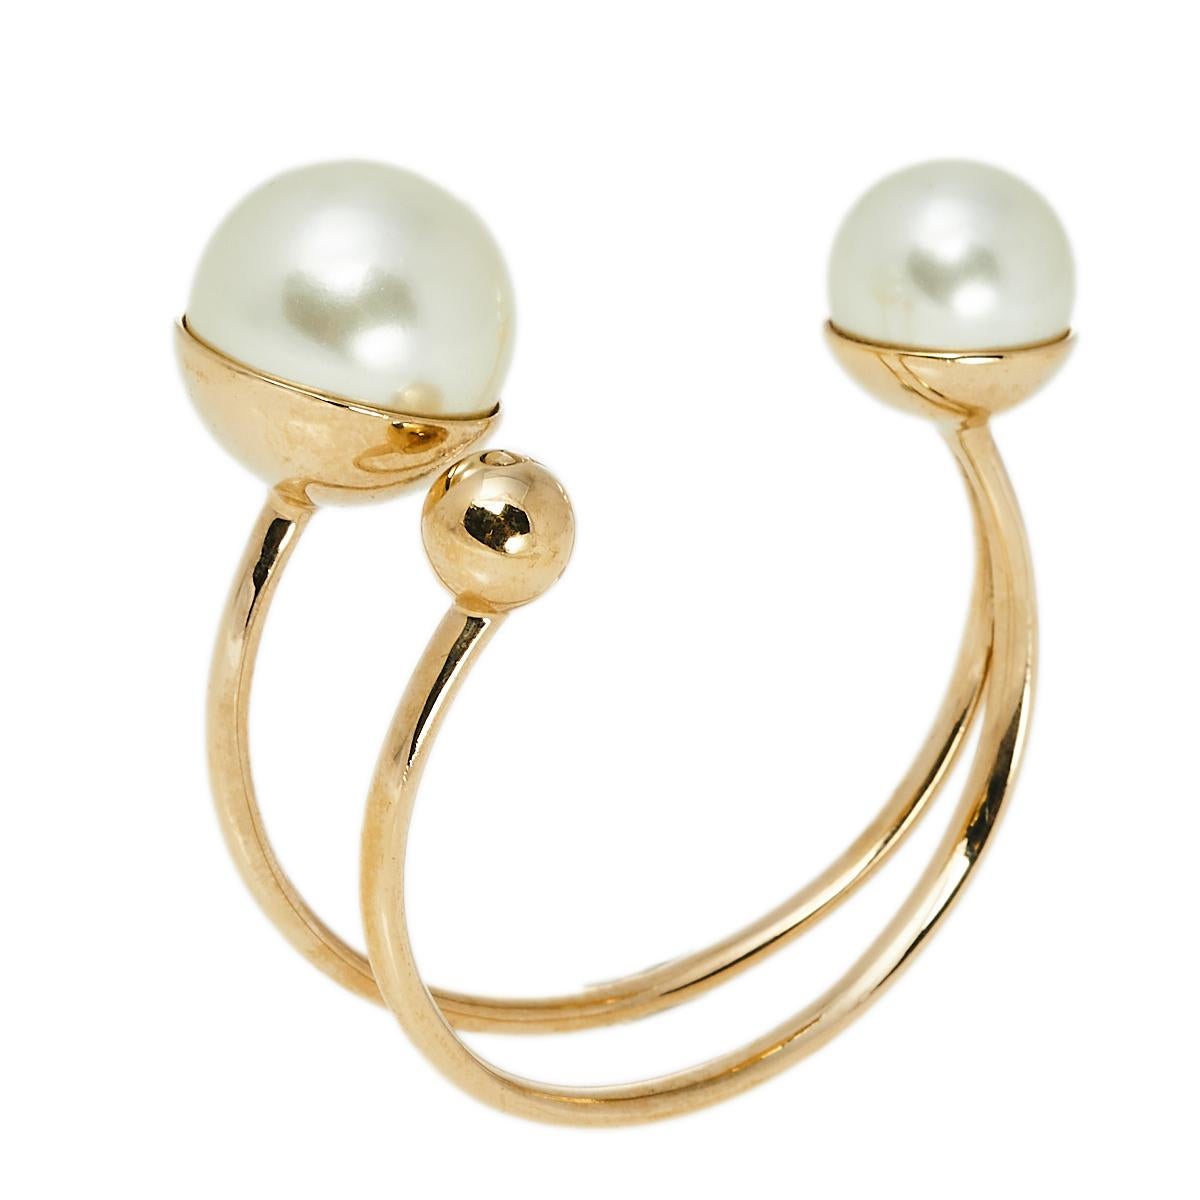 The UltraDior range is a tribute to the iconic Dior pearl. The open cuff bracelet is designed with a gold-tone frame and two faux pearls at the ends along and one gold-tone stud on one end of the bracelet. Pair it with classy outfits and your faux